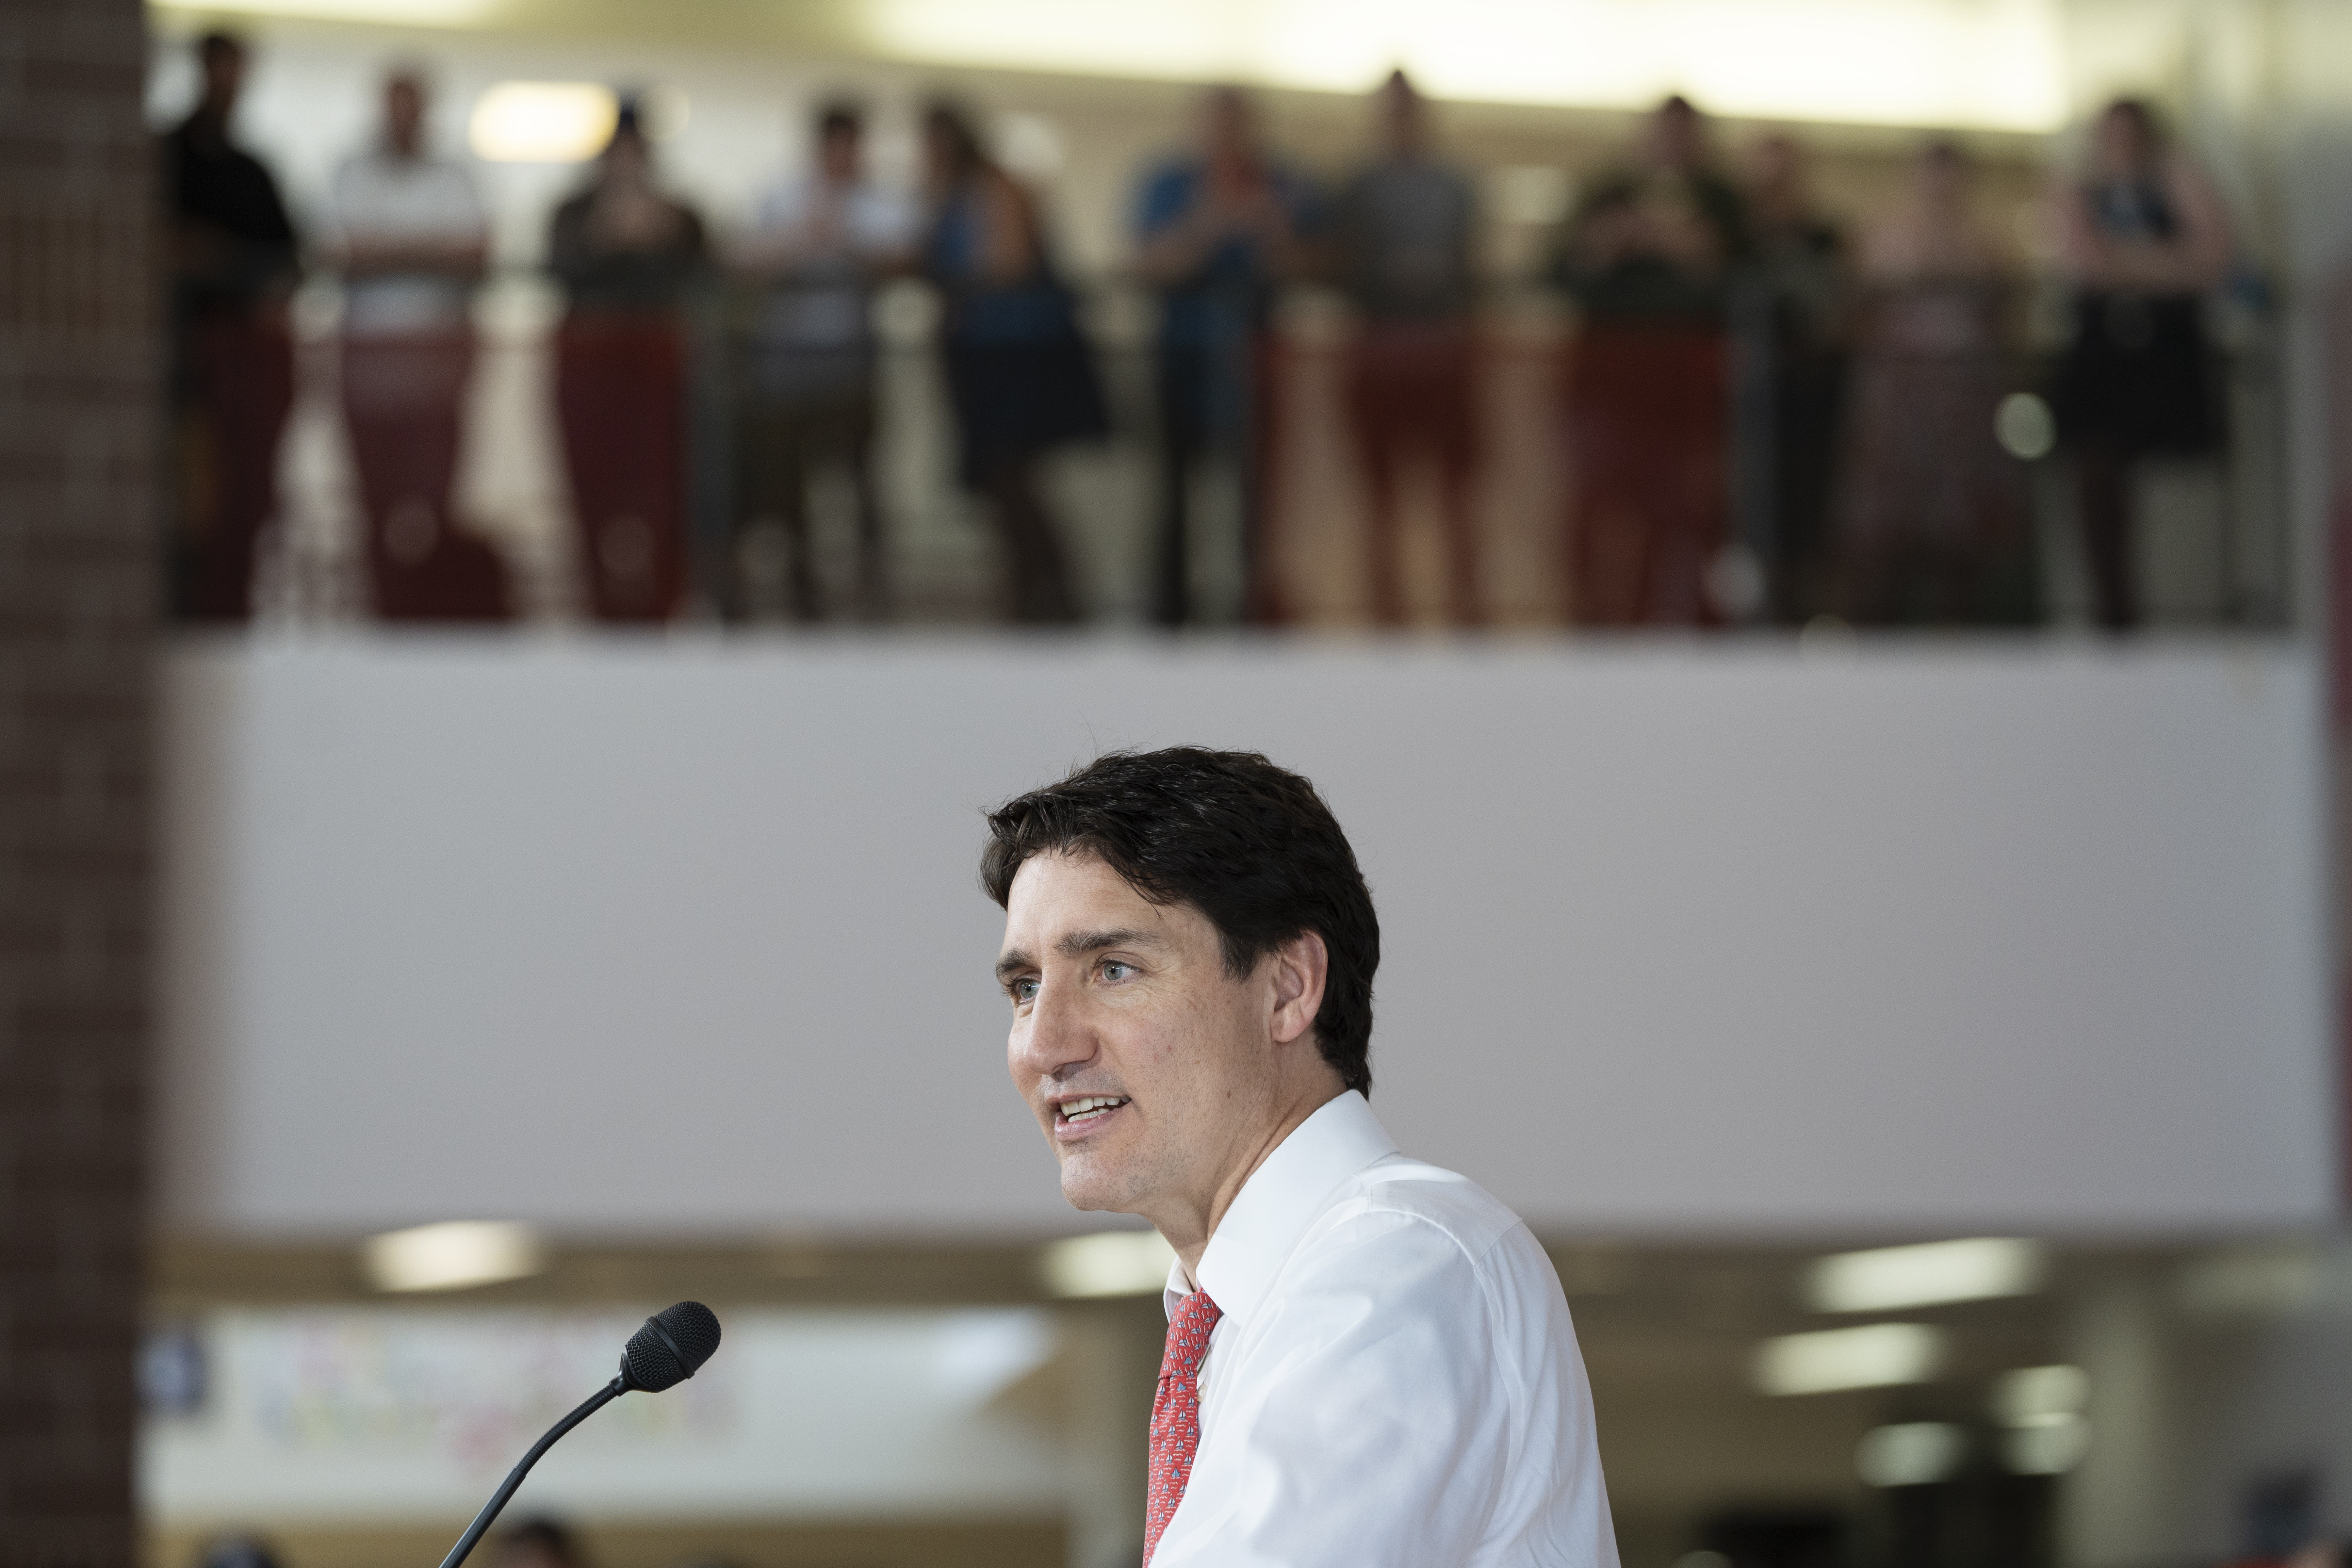 St. Paul’s byelection mirrors choice for voters in next federal vote: Trudeau